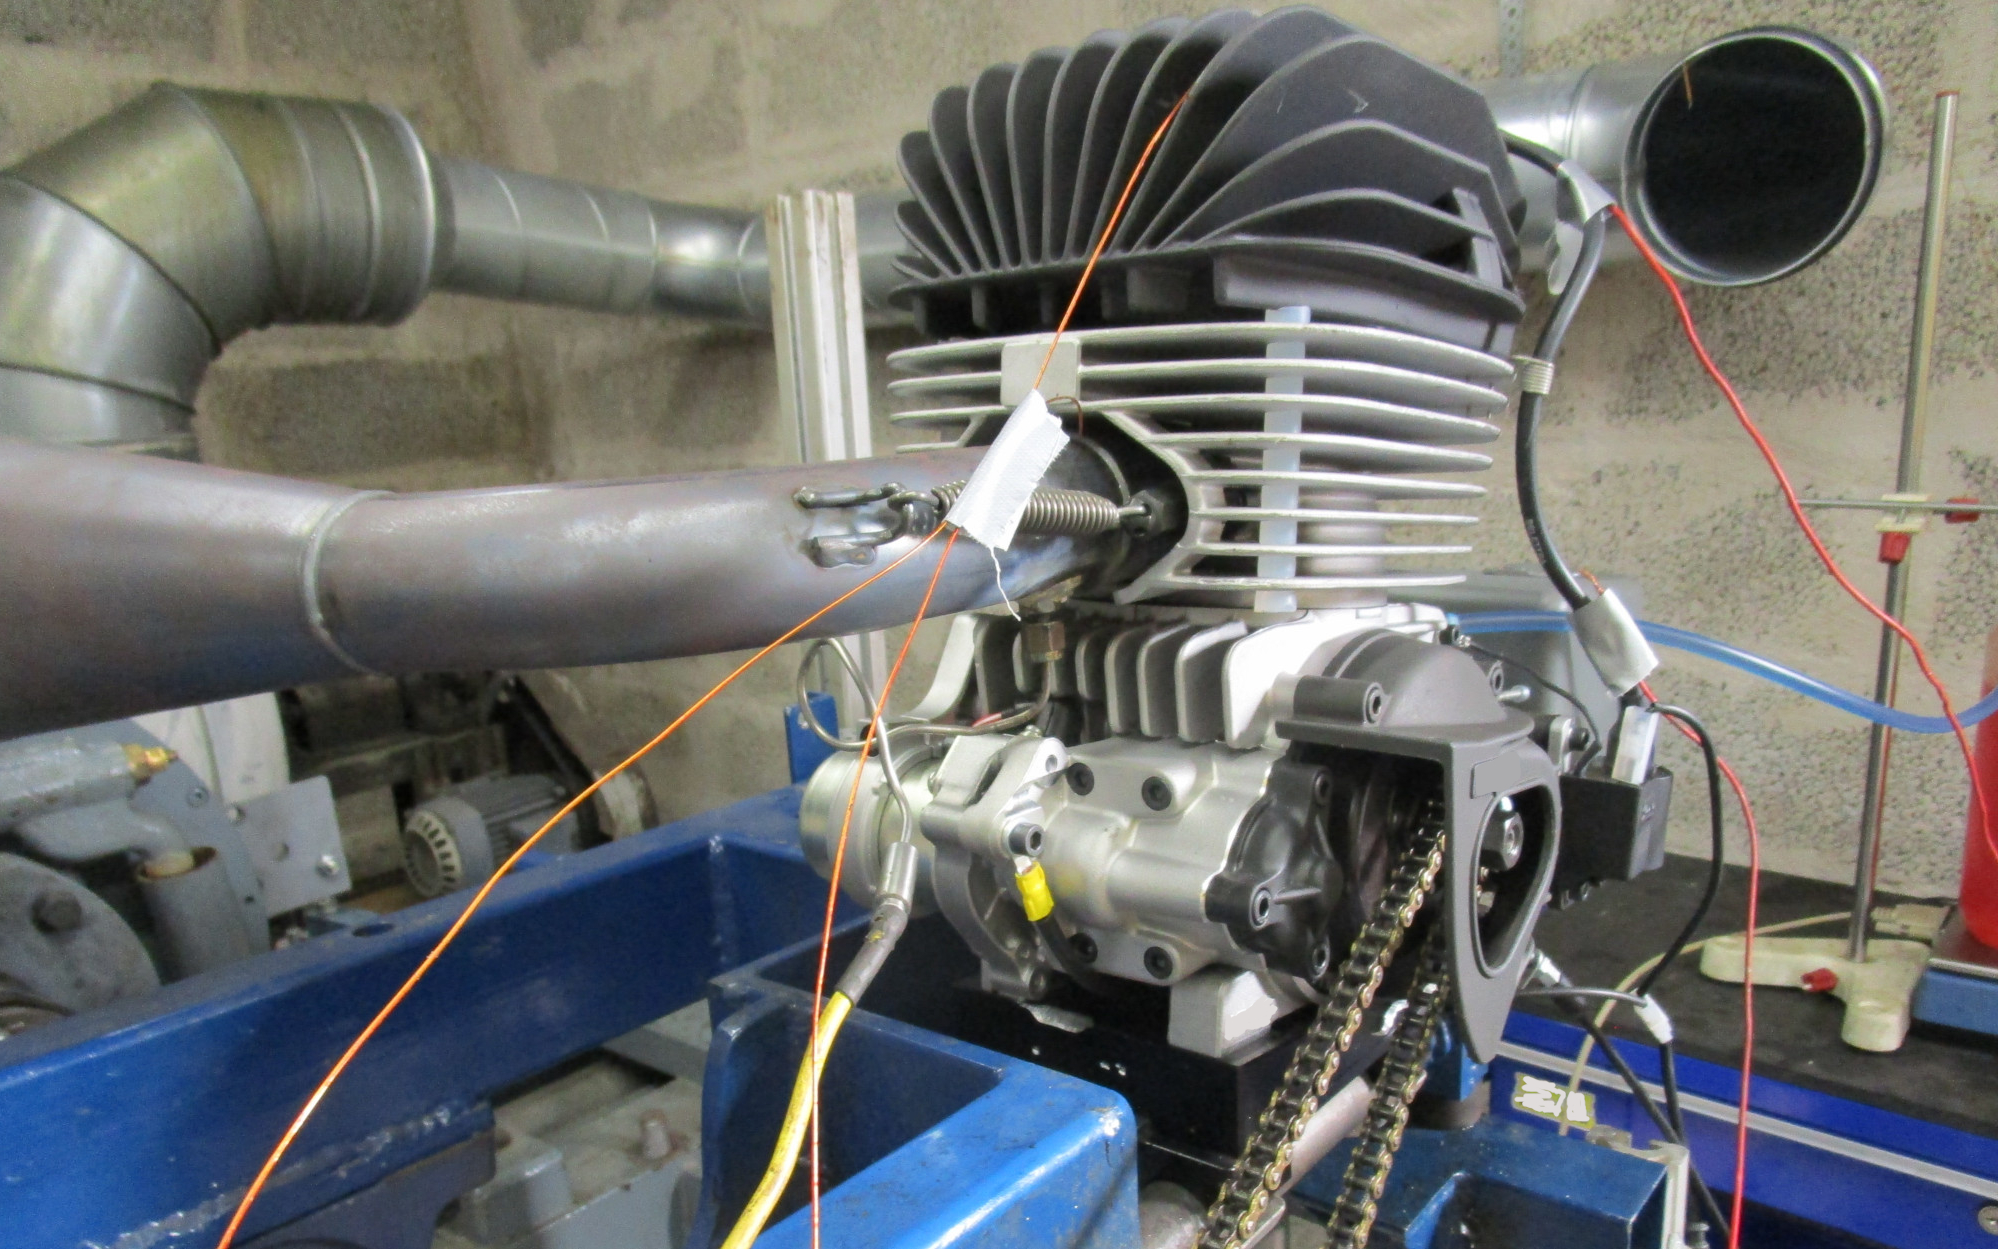 Engine in action, test rig